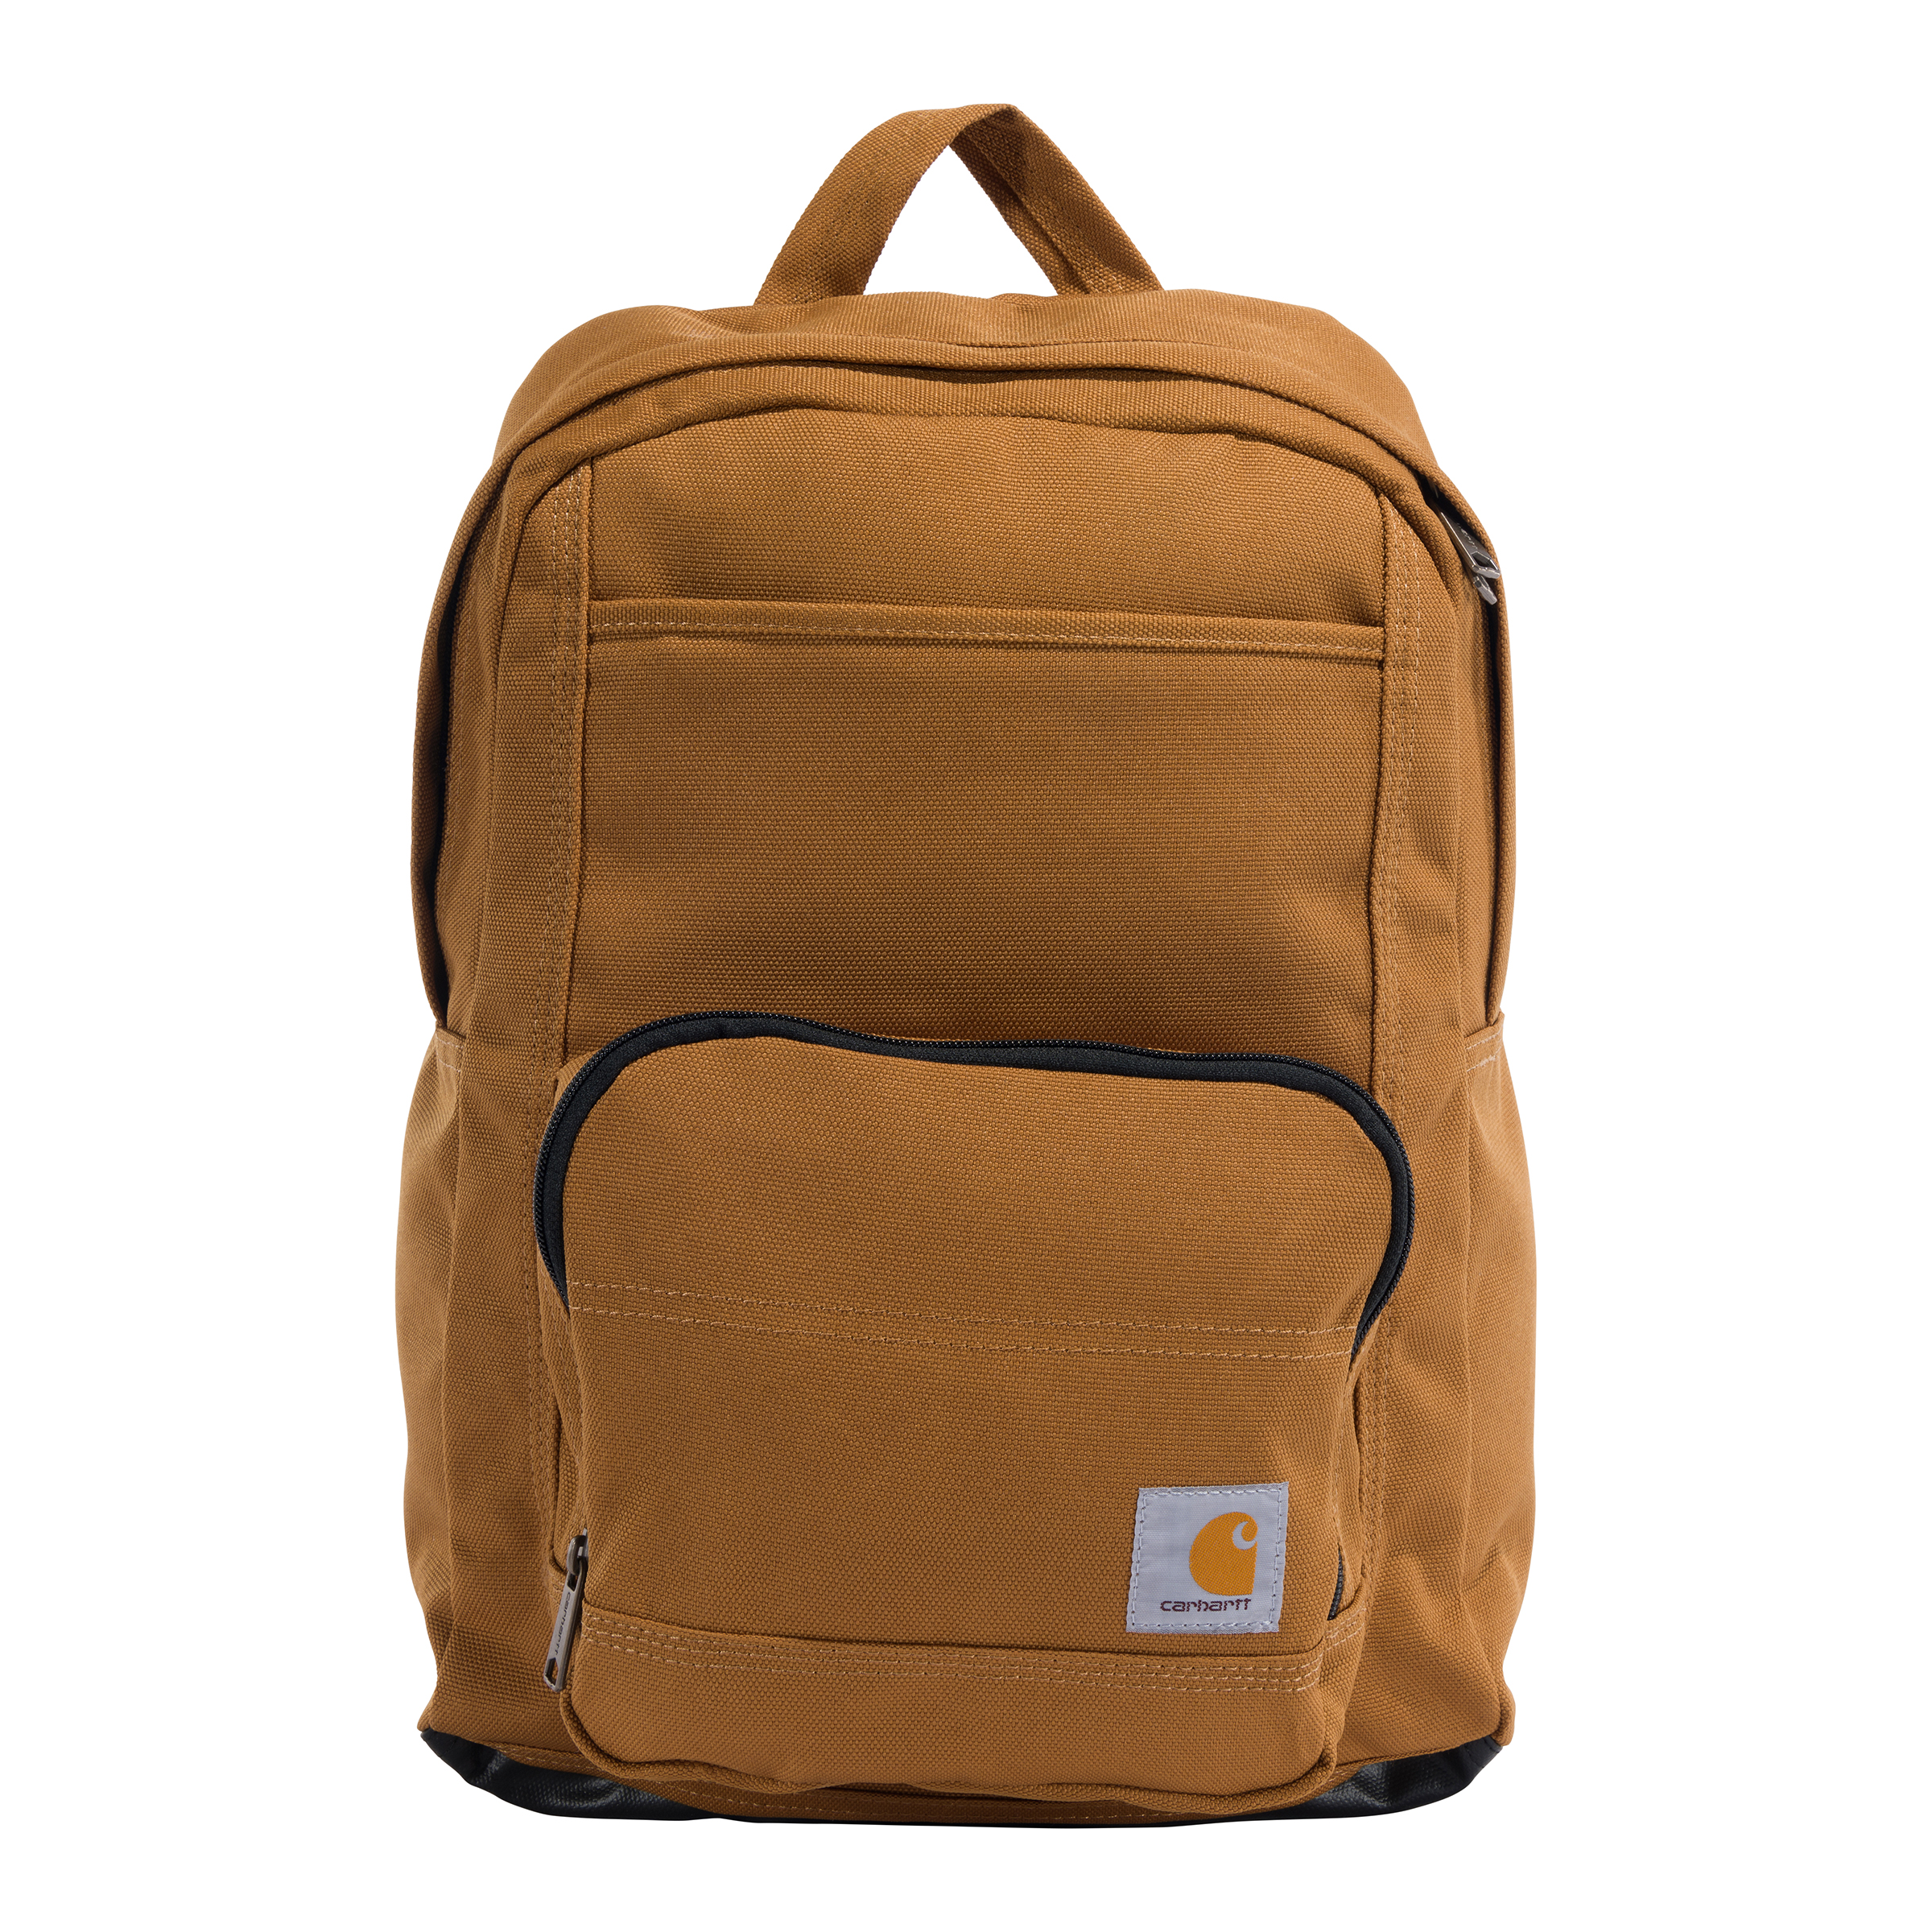 Picture of Carhartt B0000275 Mens 23L Single-Compartment Backpack